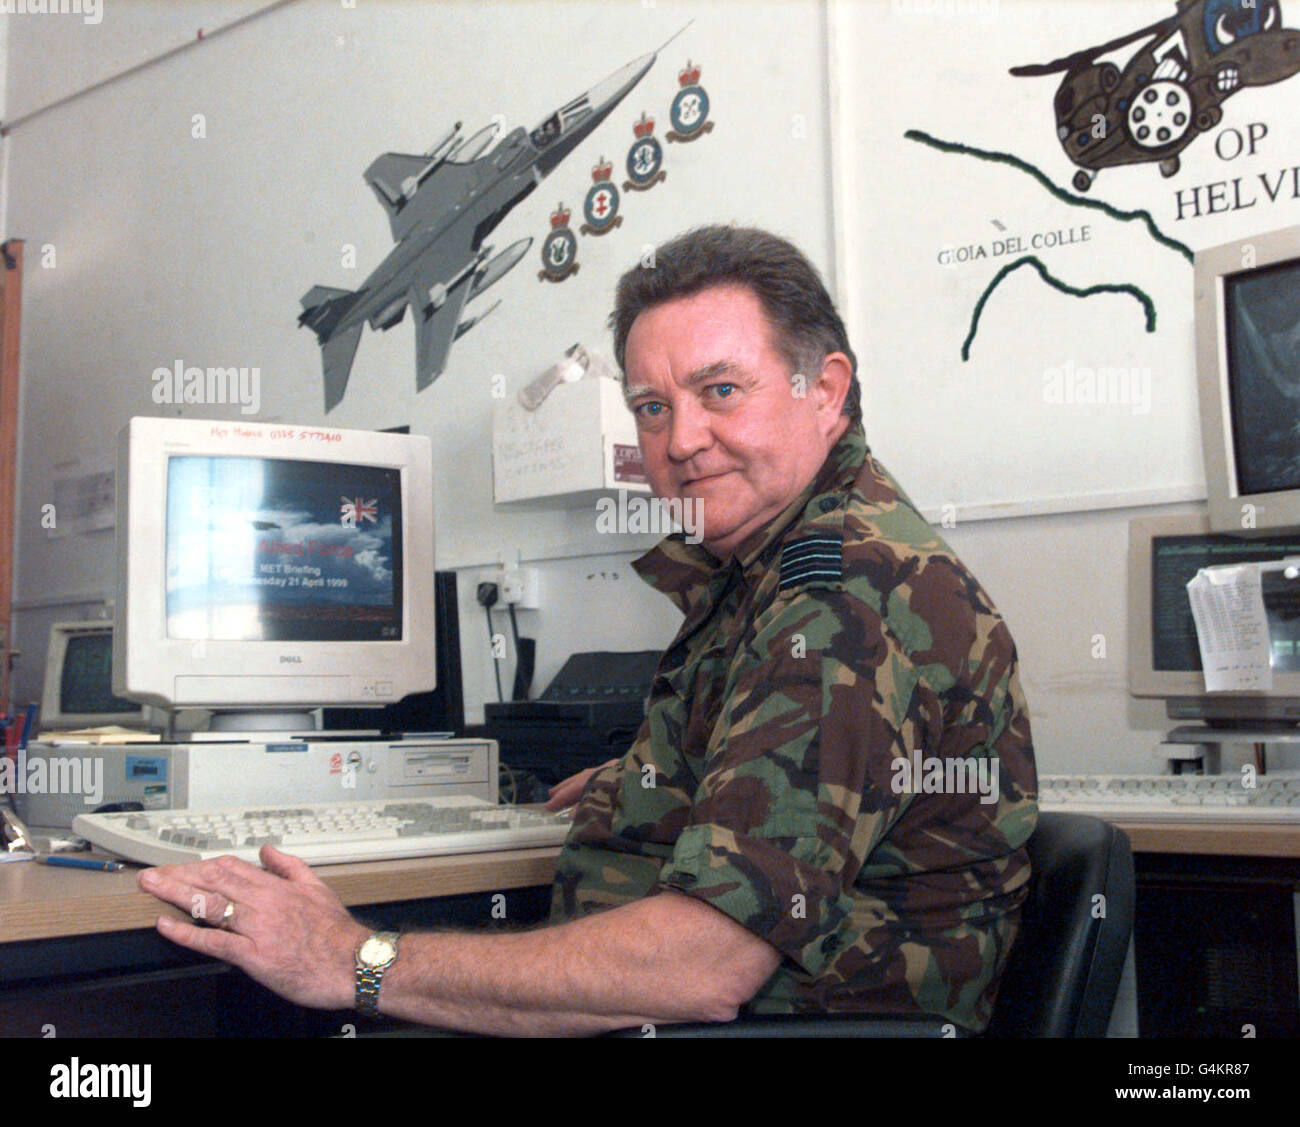 Wing Commander Bill McQueen, the Royal Air Force's meteorological officer at Gioia del Colle, southern Italy, at his desk as he prepares to brief Harrier pilots from No 1 Squadron on the weather condition they will meet during a sortie over Kosovo. * As head of the mobile meteorological unit at the base, he heads a round-the-clock operation which, using satellite imagery and other data, keeps a detailed eye on current conditions and forecasts for the region. Wing Cdr McQueen, who is based at RAF Benson, near Oxford, said: Simply, our job is to make sure the pilots are never surprised by any Stock Photo